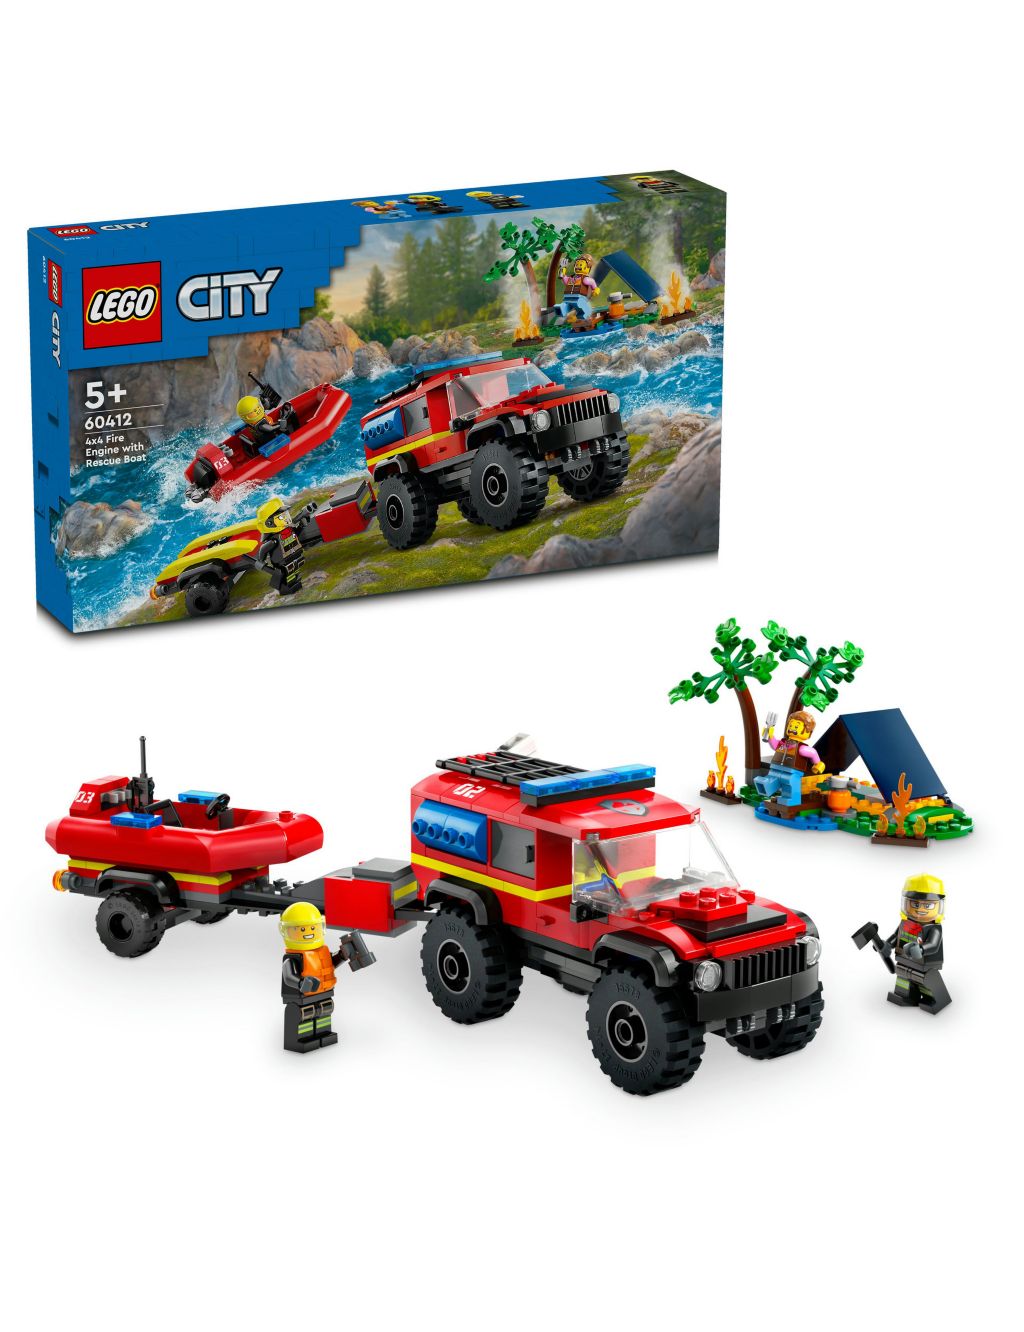 LEGO® City 4x4 Fire Engine with Rescue Boat Toy 60412 (5+ Yrs)